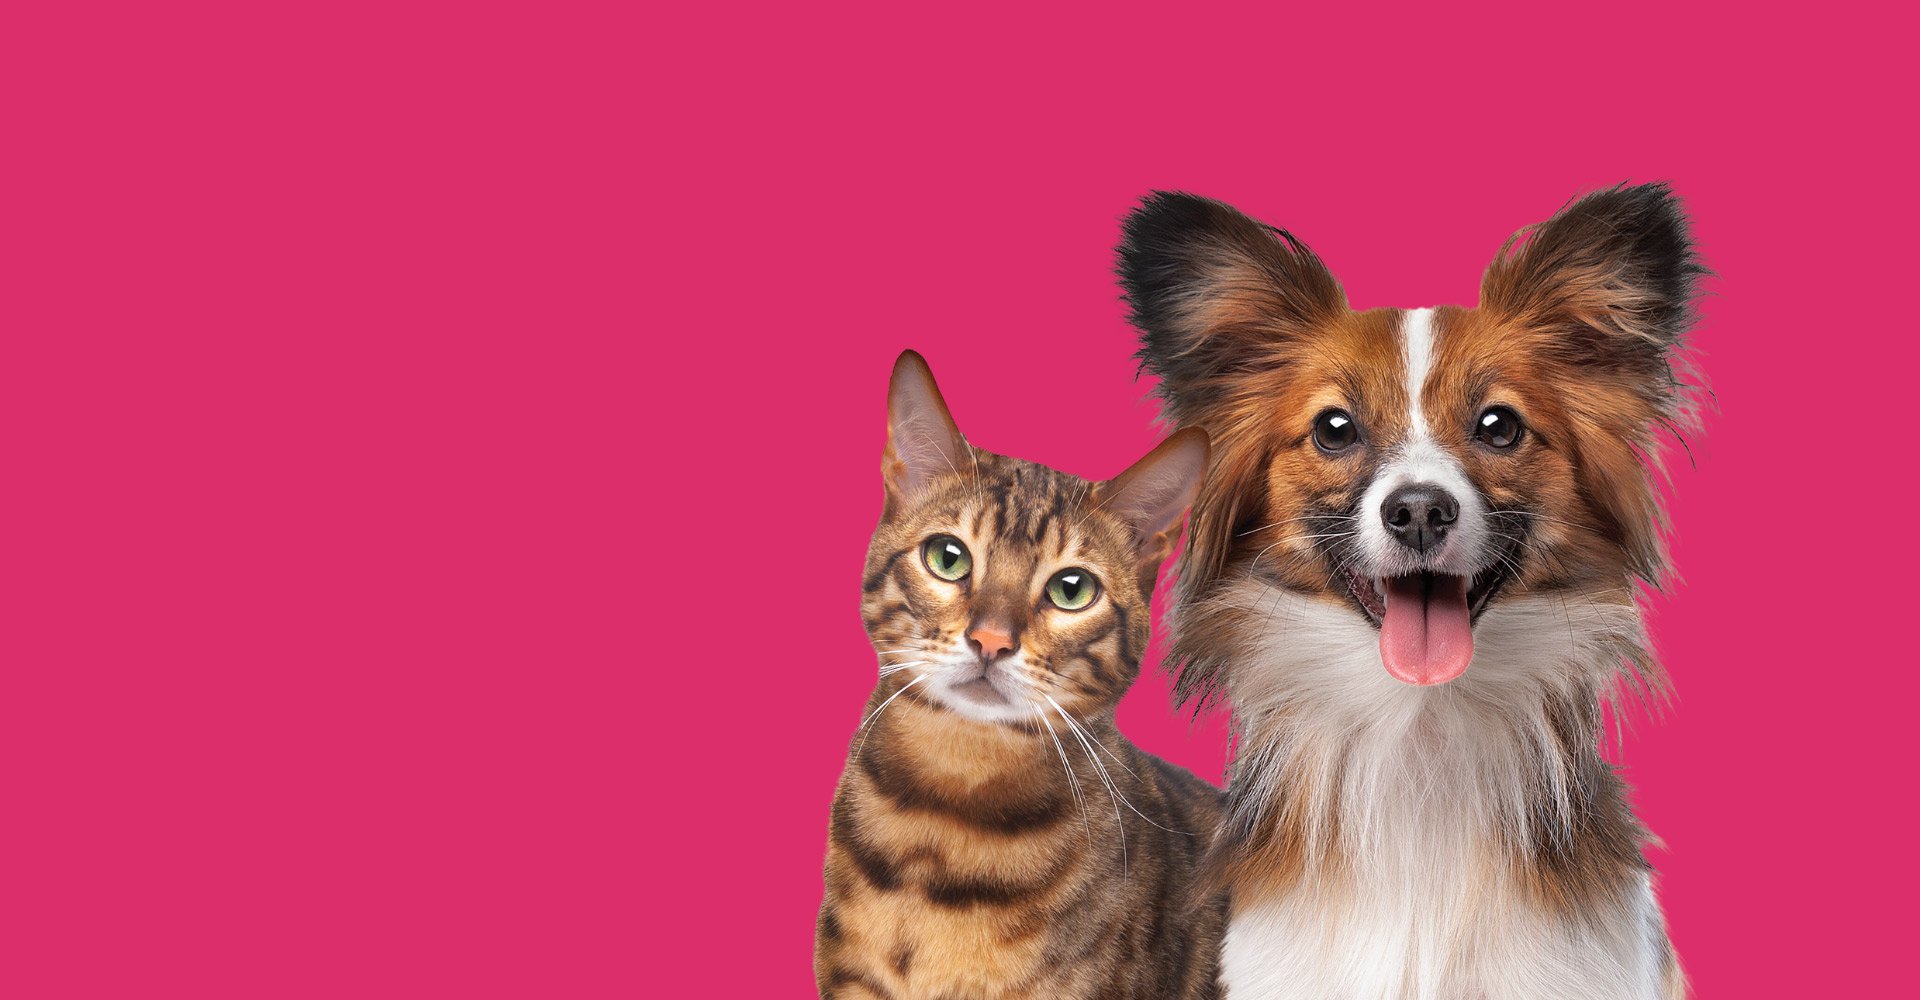 Image of a cat and dog with The Pet Health Club logo